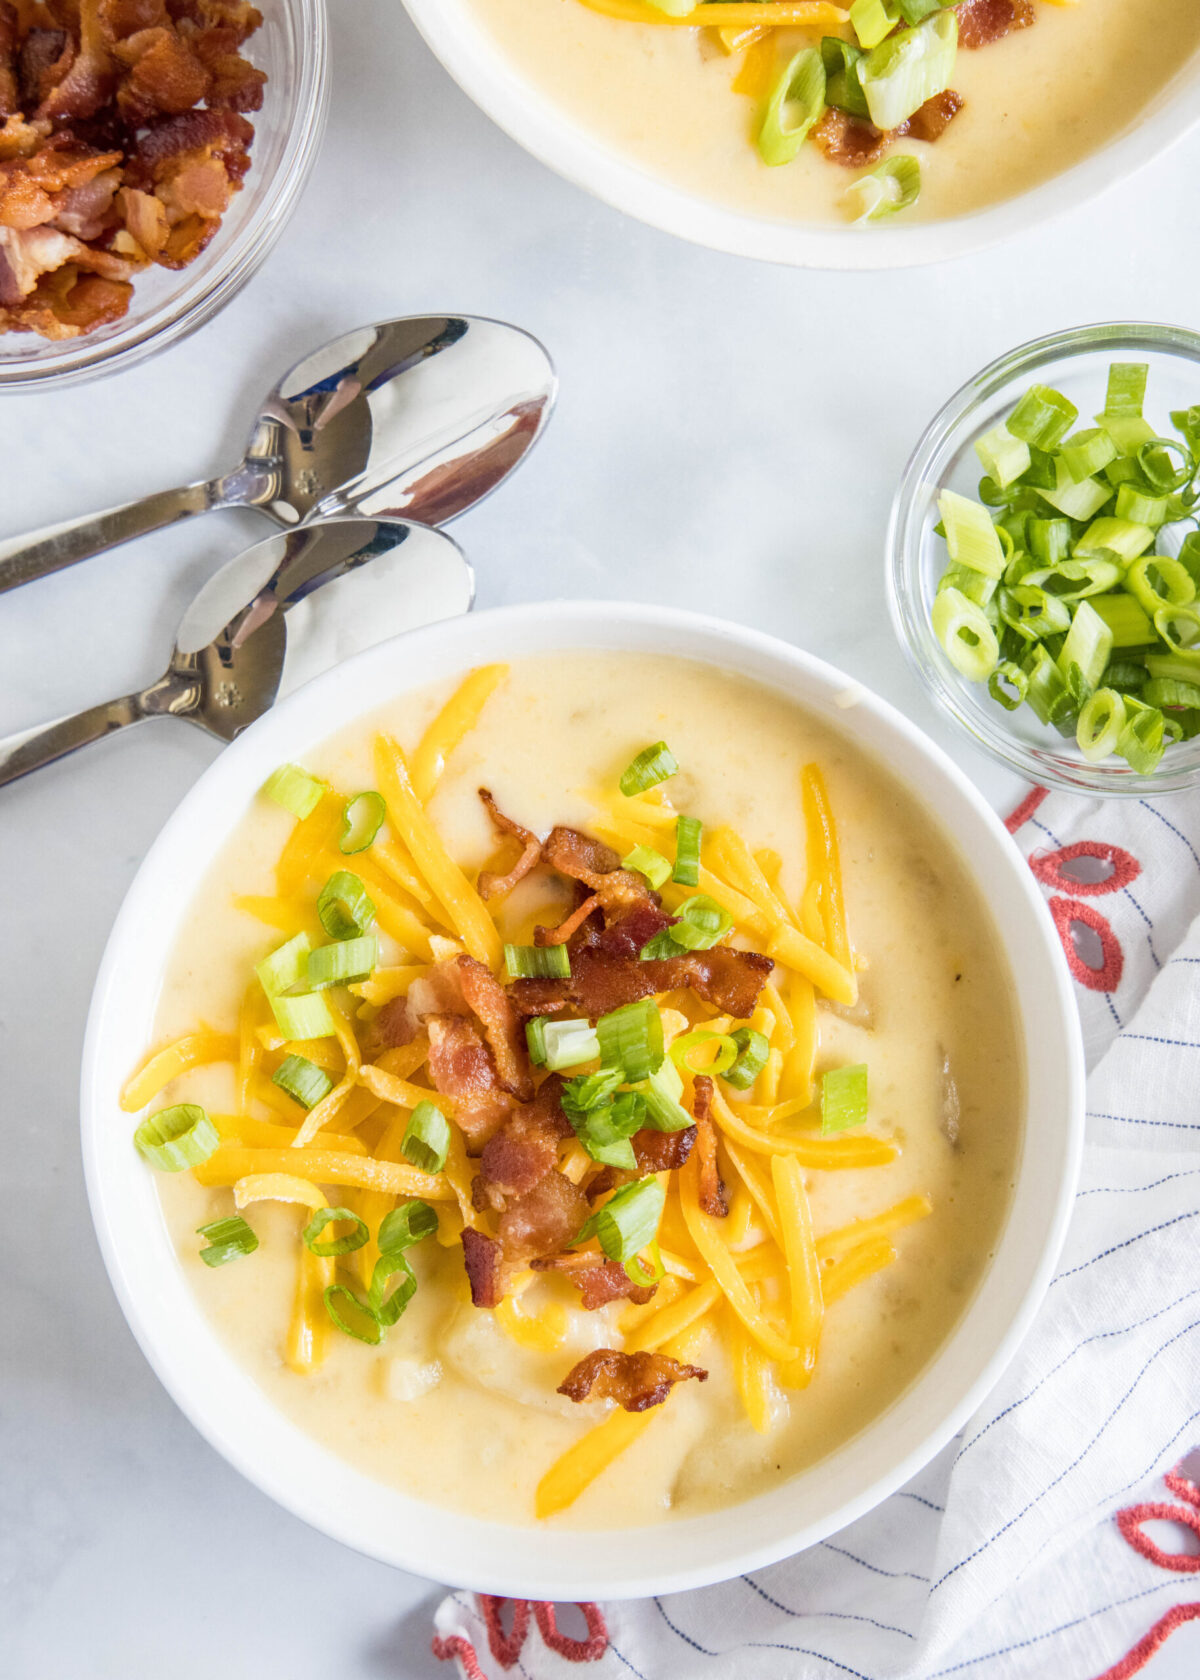 Overhead view of a bowl of potato soup topped with cheese, bacon, and green onions, next to two spoons, a bowl of green onions, a bowl of bacon, and another bowl of soup.